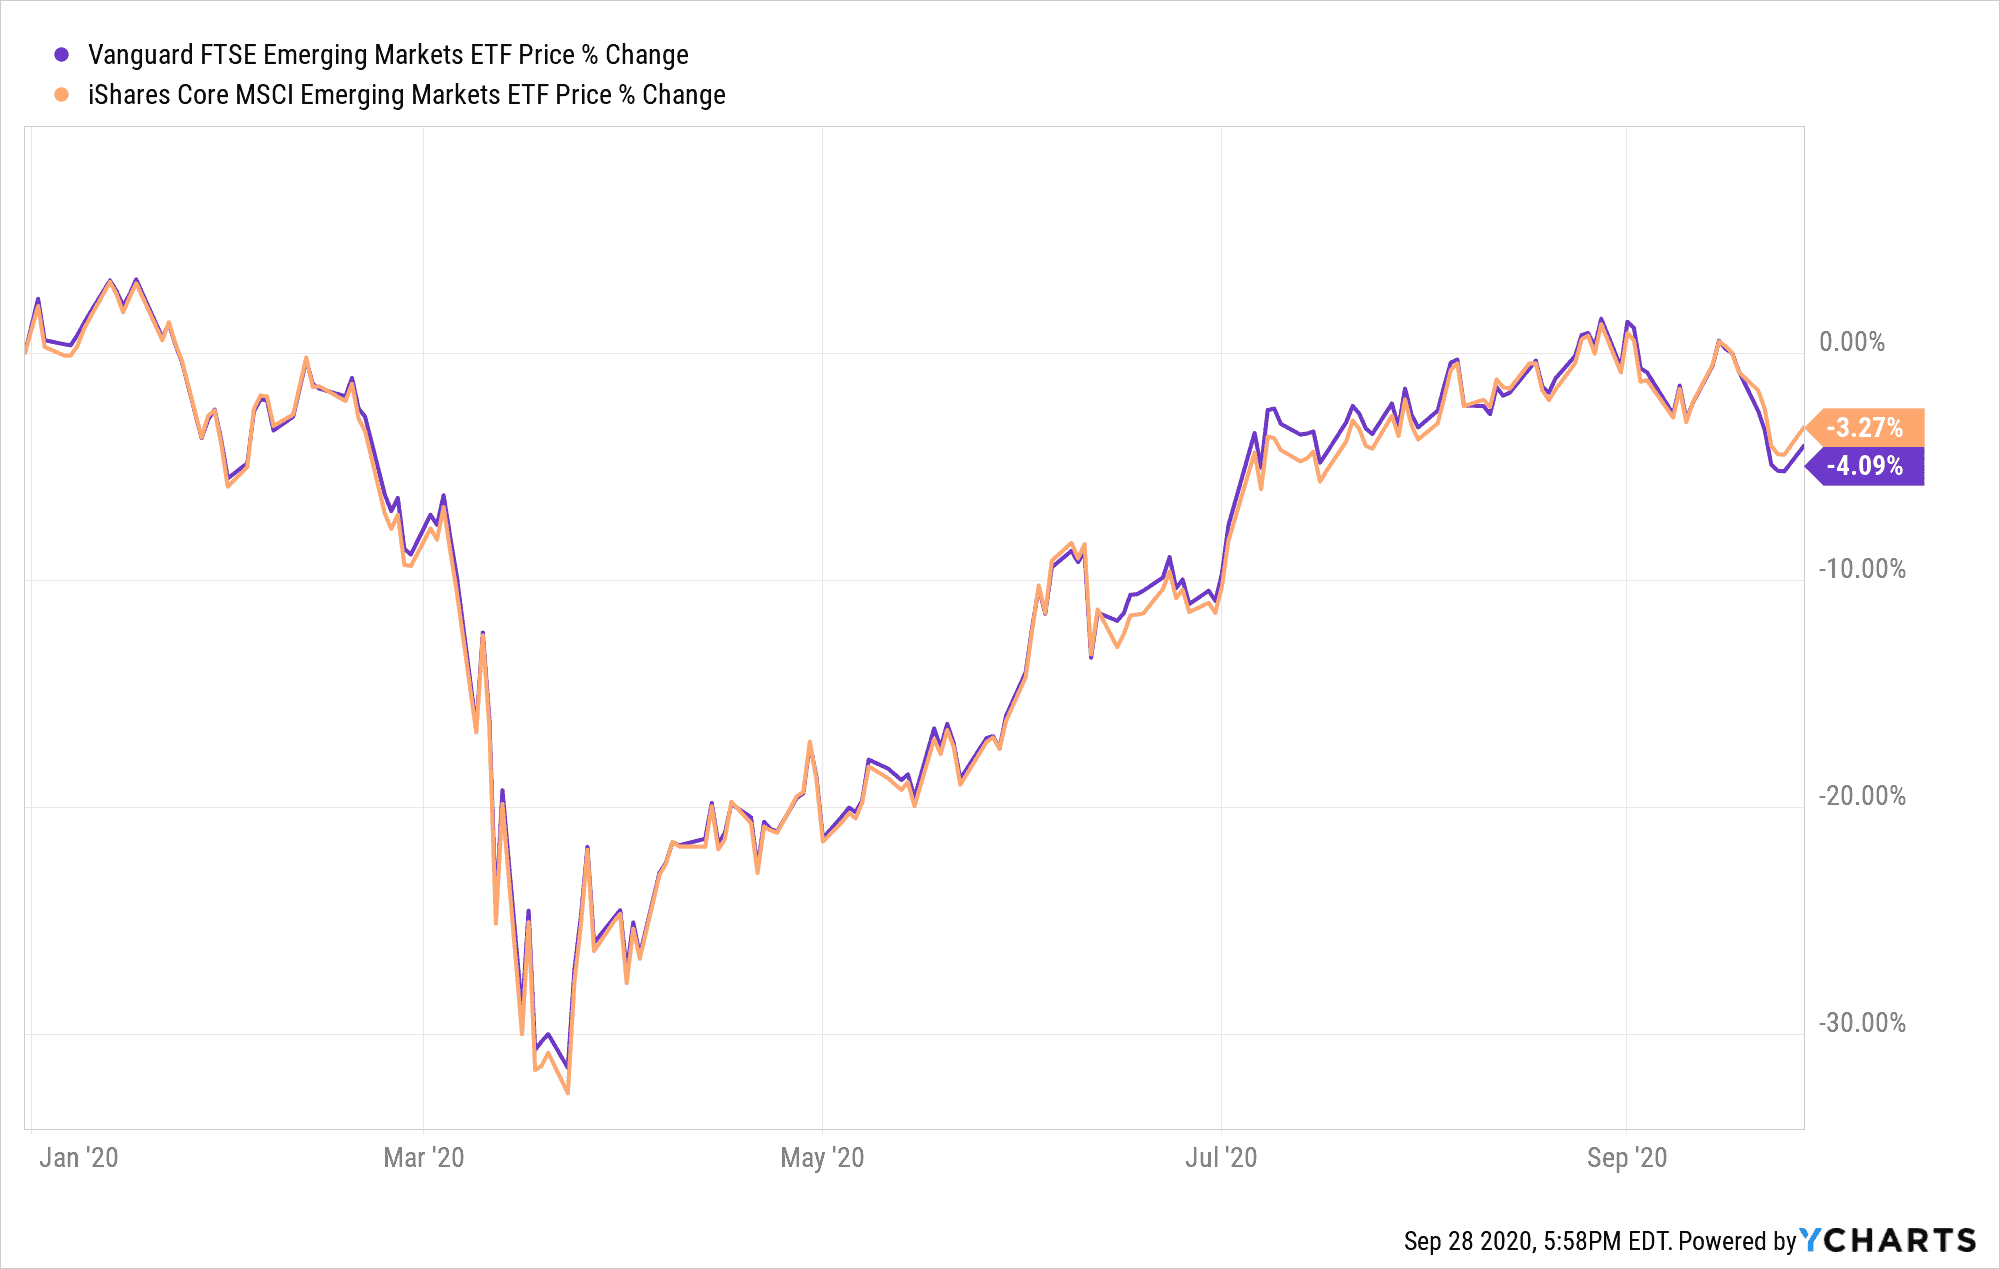 Chart showing the performance of the Vanguard Emerging Markets ETF against the iShares Emerging Markets ETF.